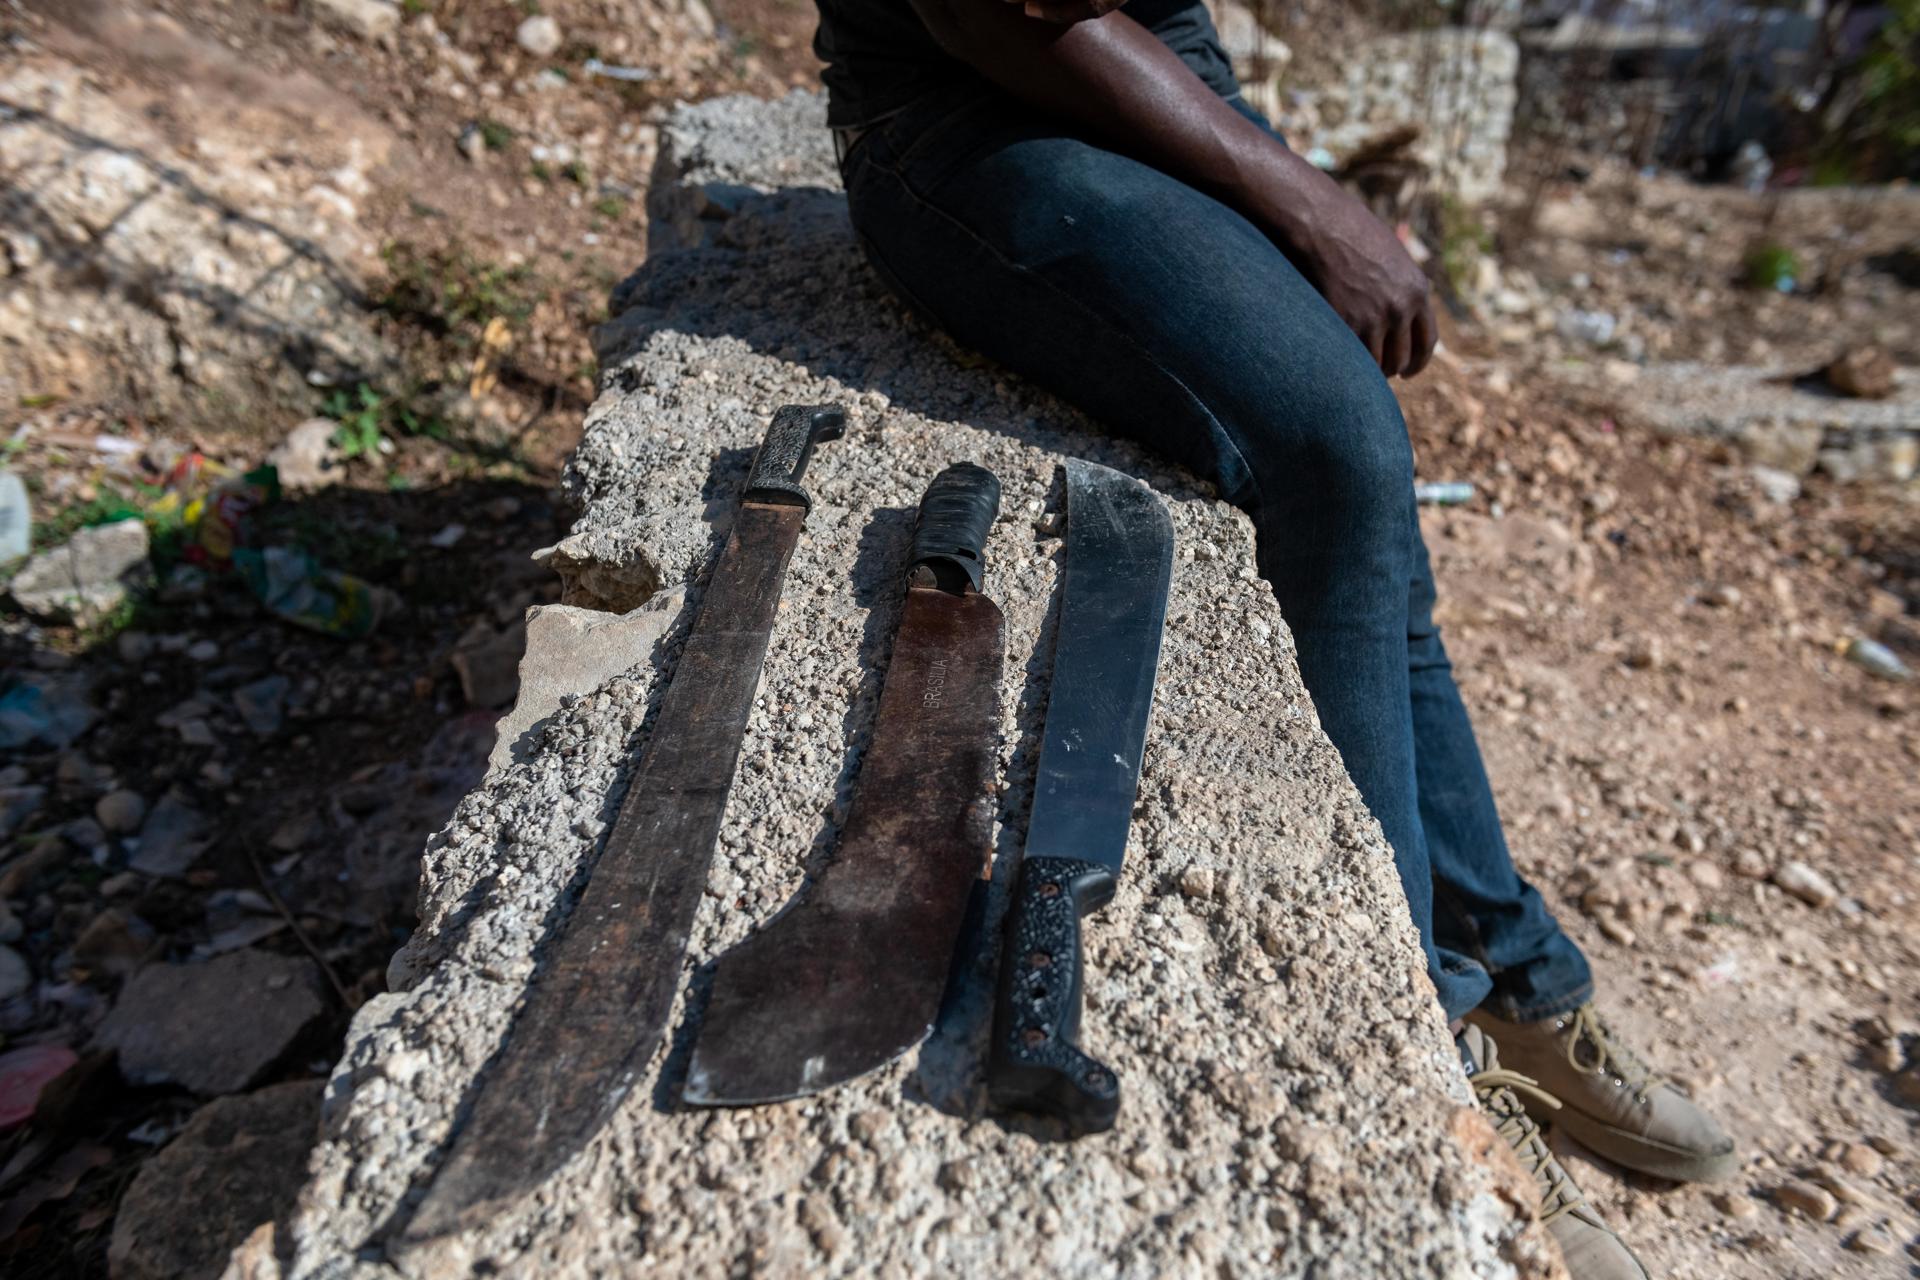 A member of a self-defense group with machetes in Puerto Prince, Haiti on March 31, 2023. EFE/Johnson Sabin